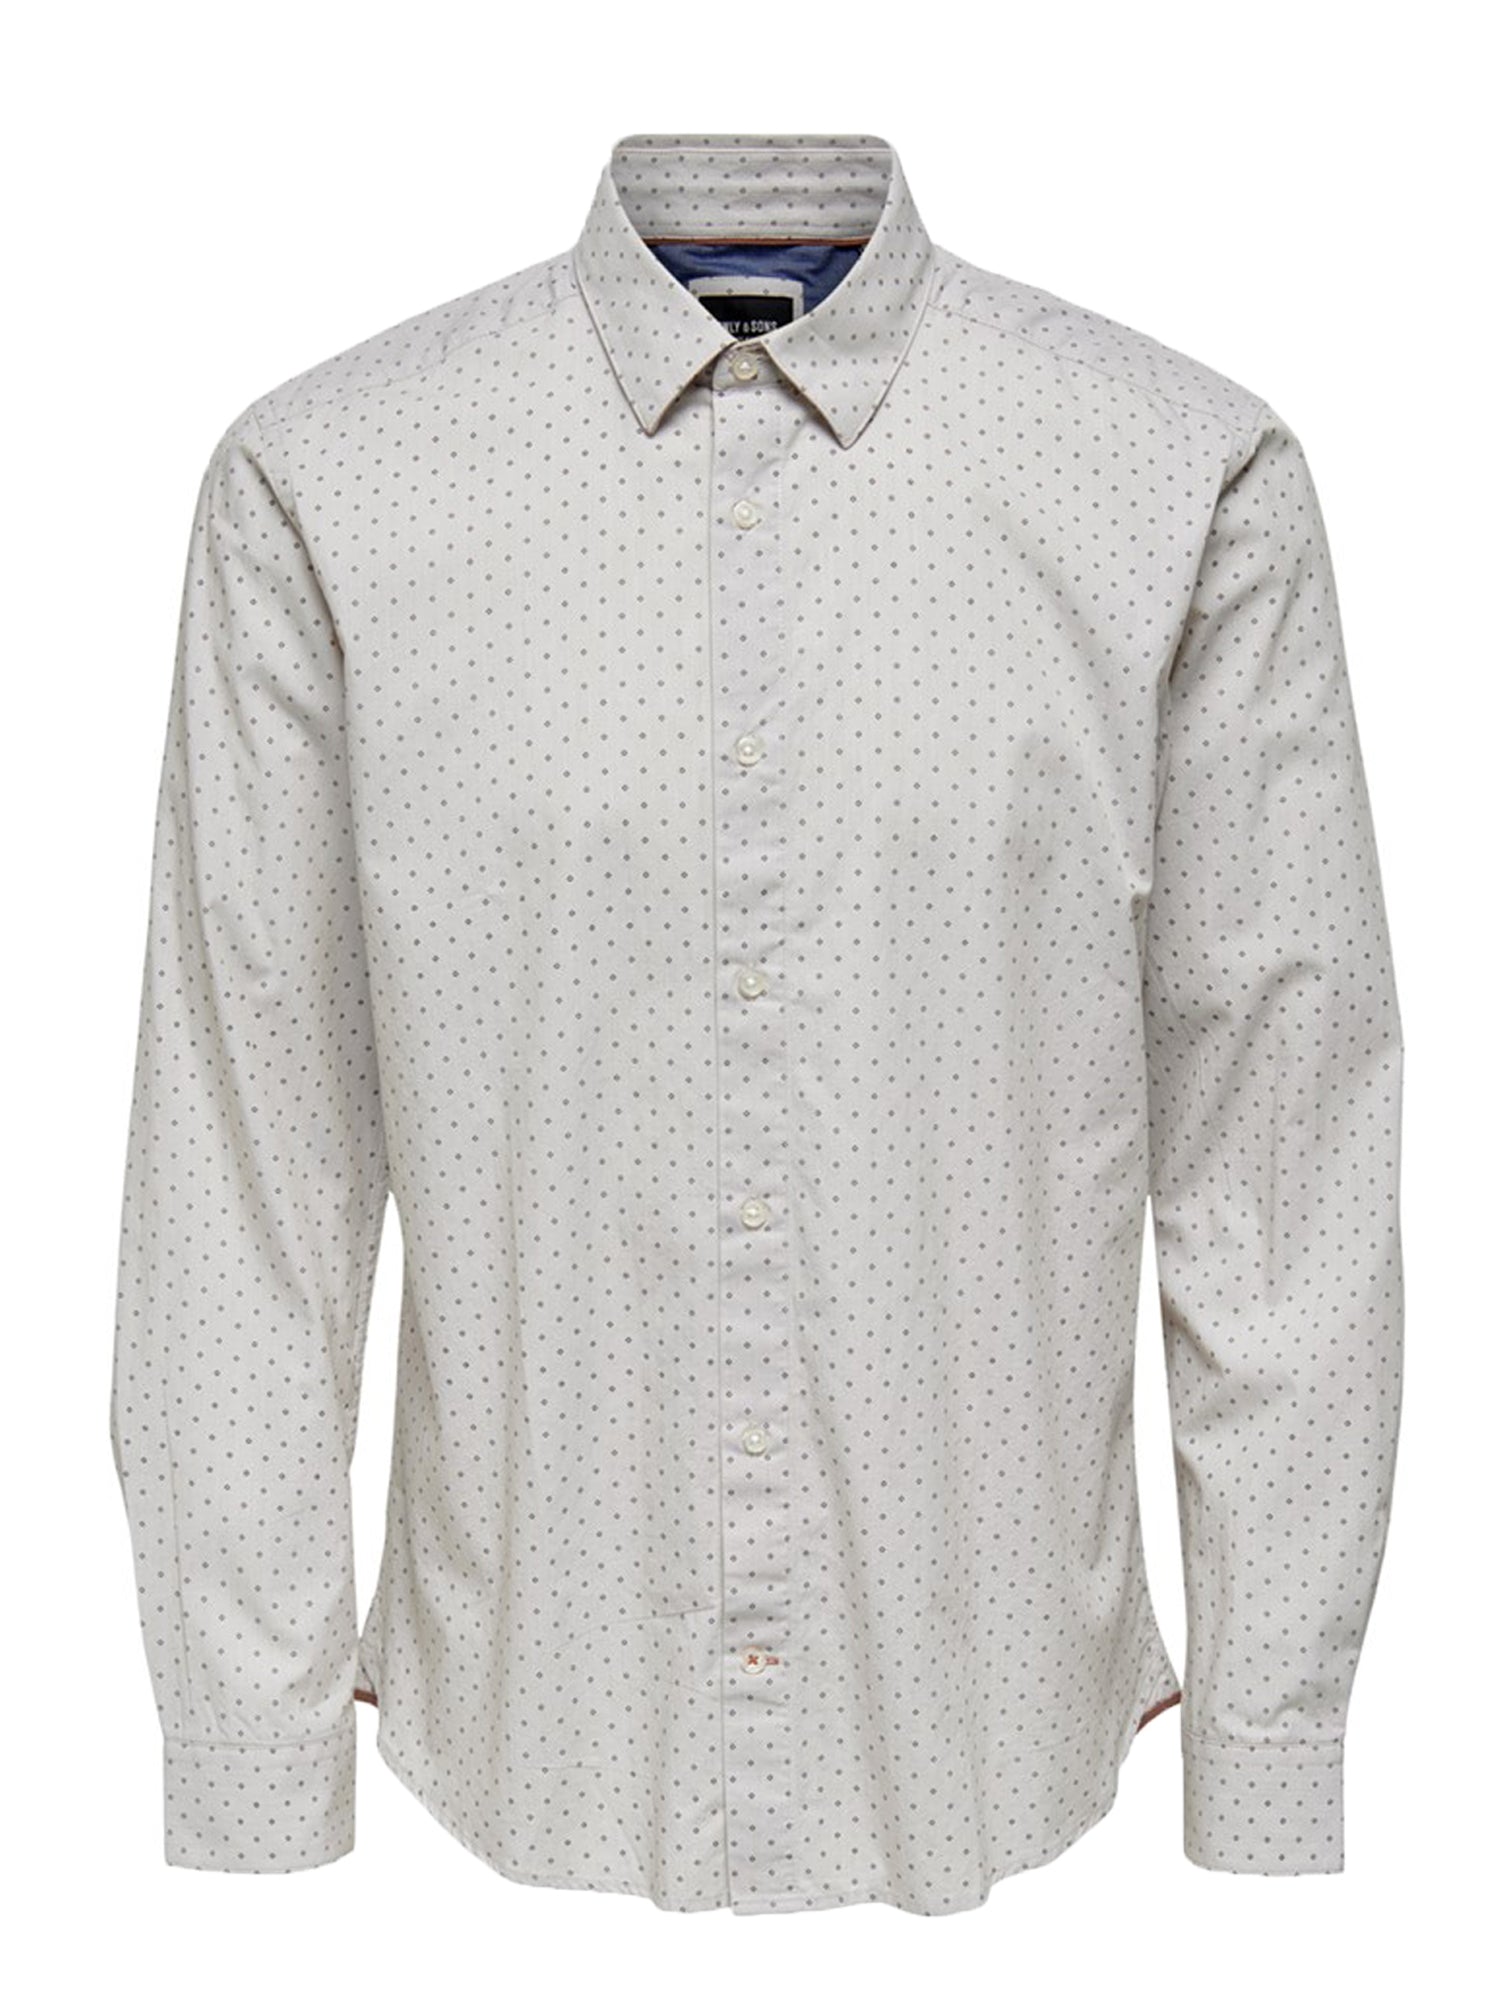 ONLY&SONS CAMICIA CLASSICA BEIGE